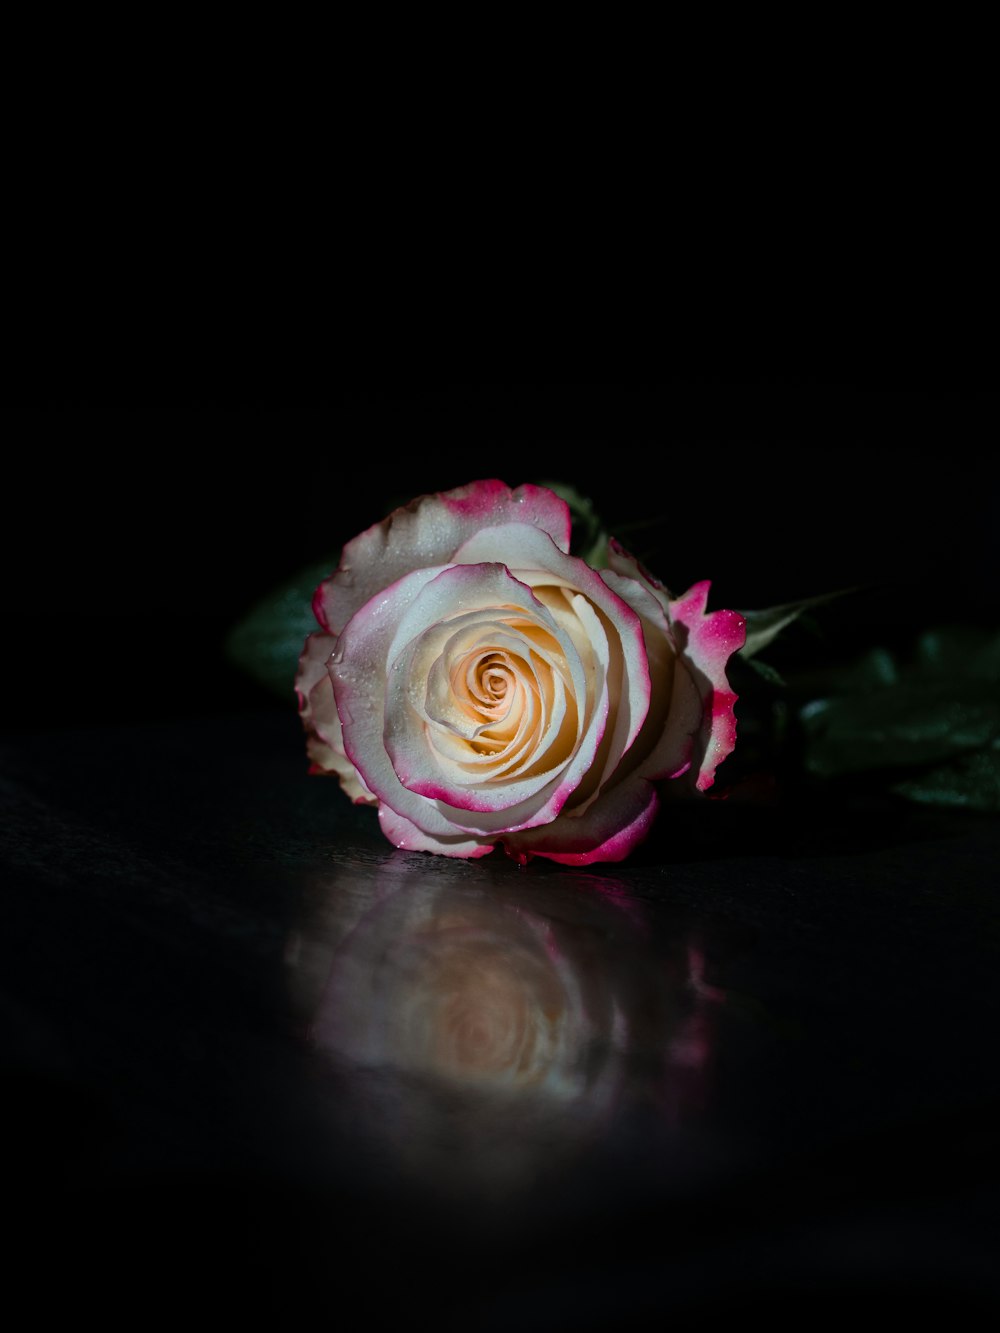 Pink and white rose in black background photo – Free Usa Image on ...